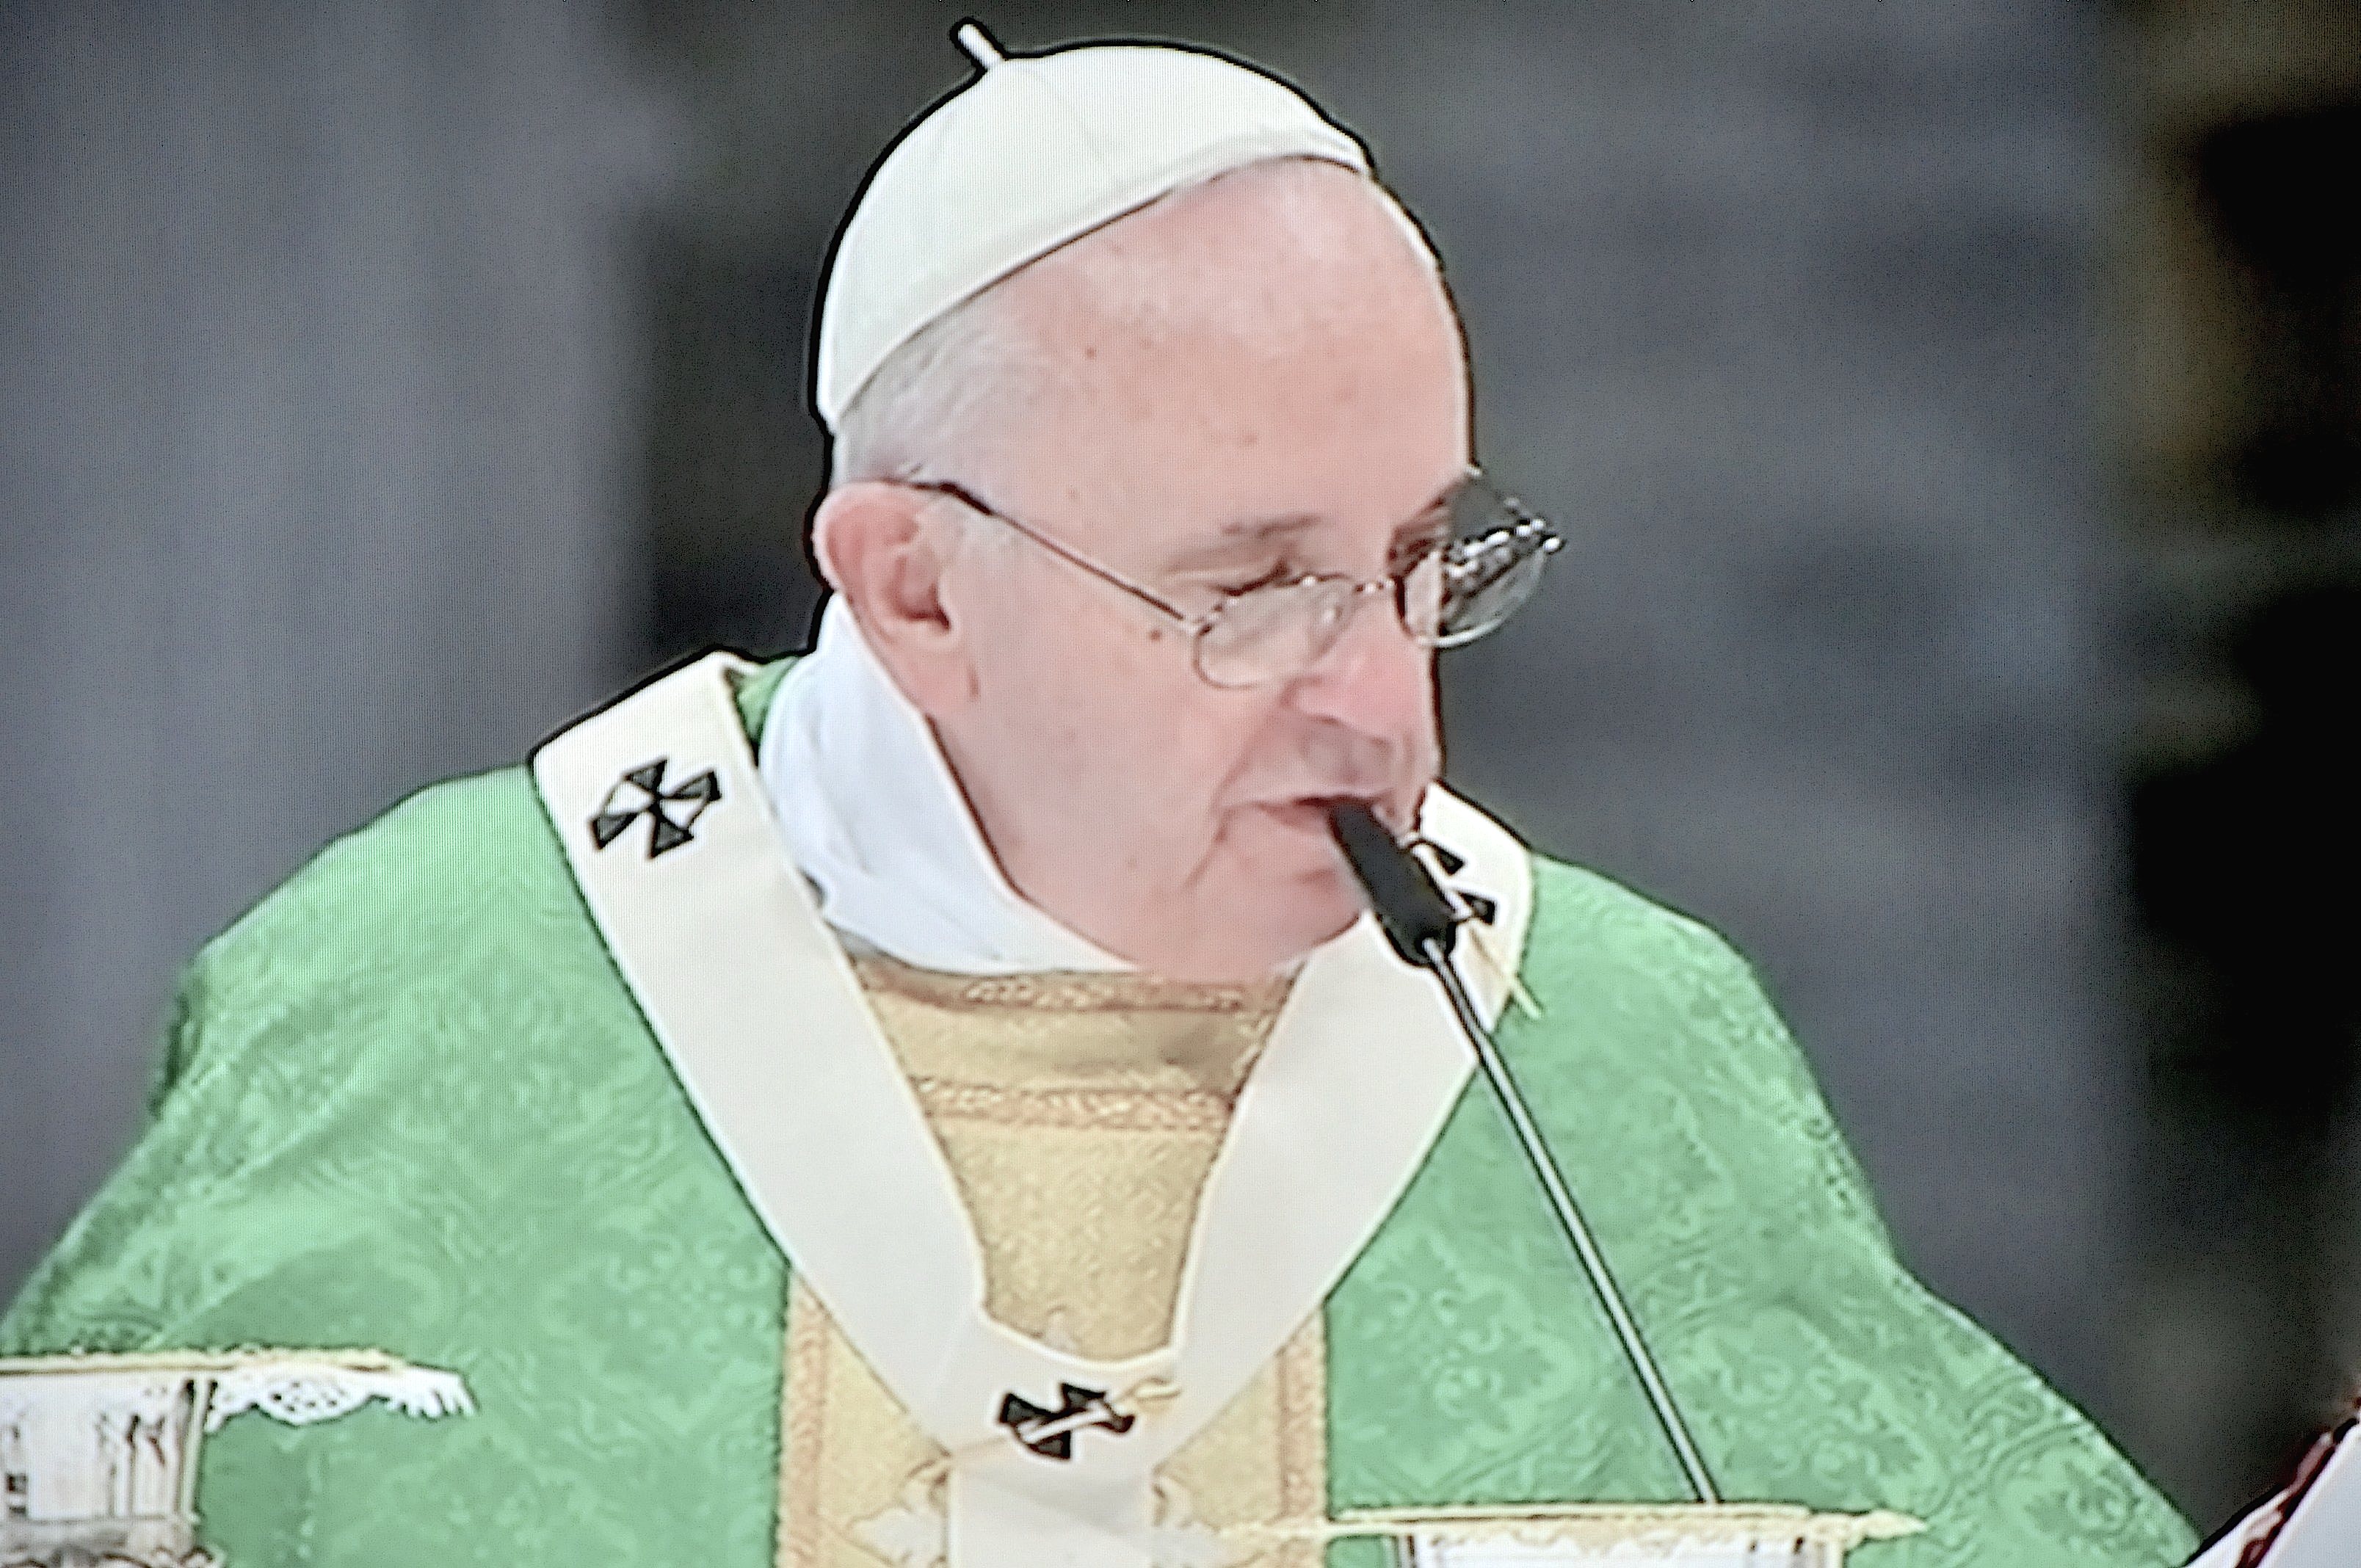 Pope Francis during the Mass for the Opening of the Synod of Bshops